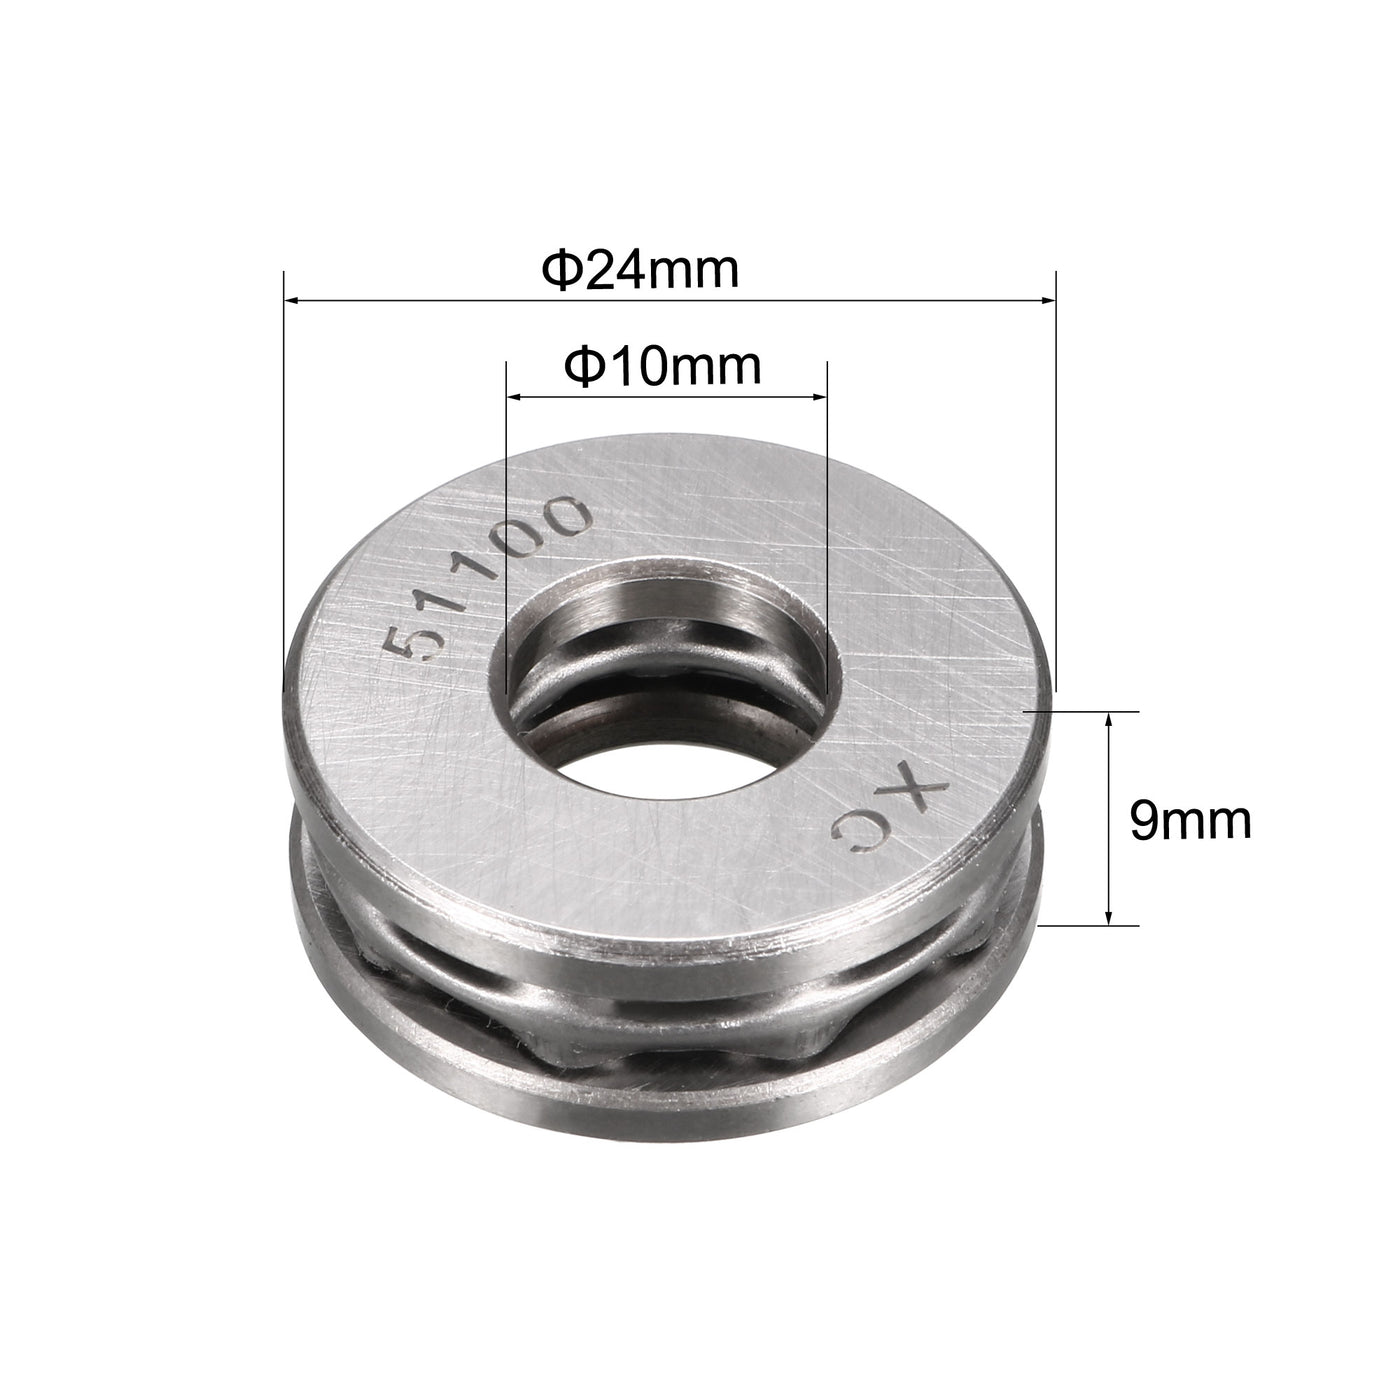 uxcell Uxcell 51100 Miniature Thrust Ball Bearing 10x24x9mm Chrome Steel with Washer 4pcs